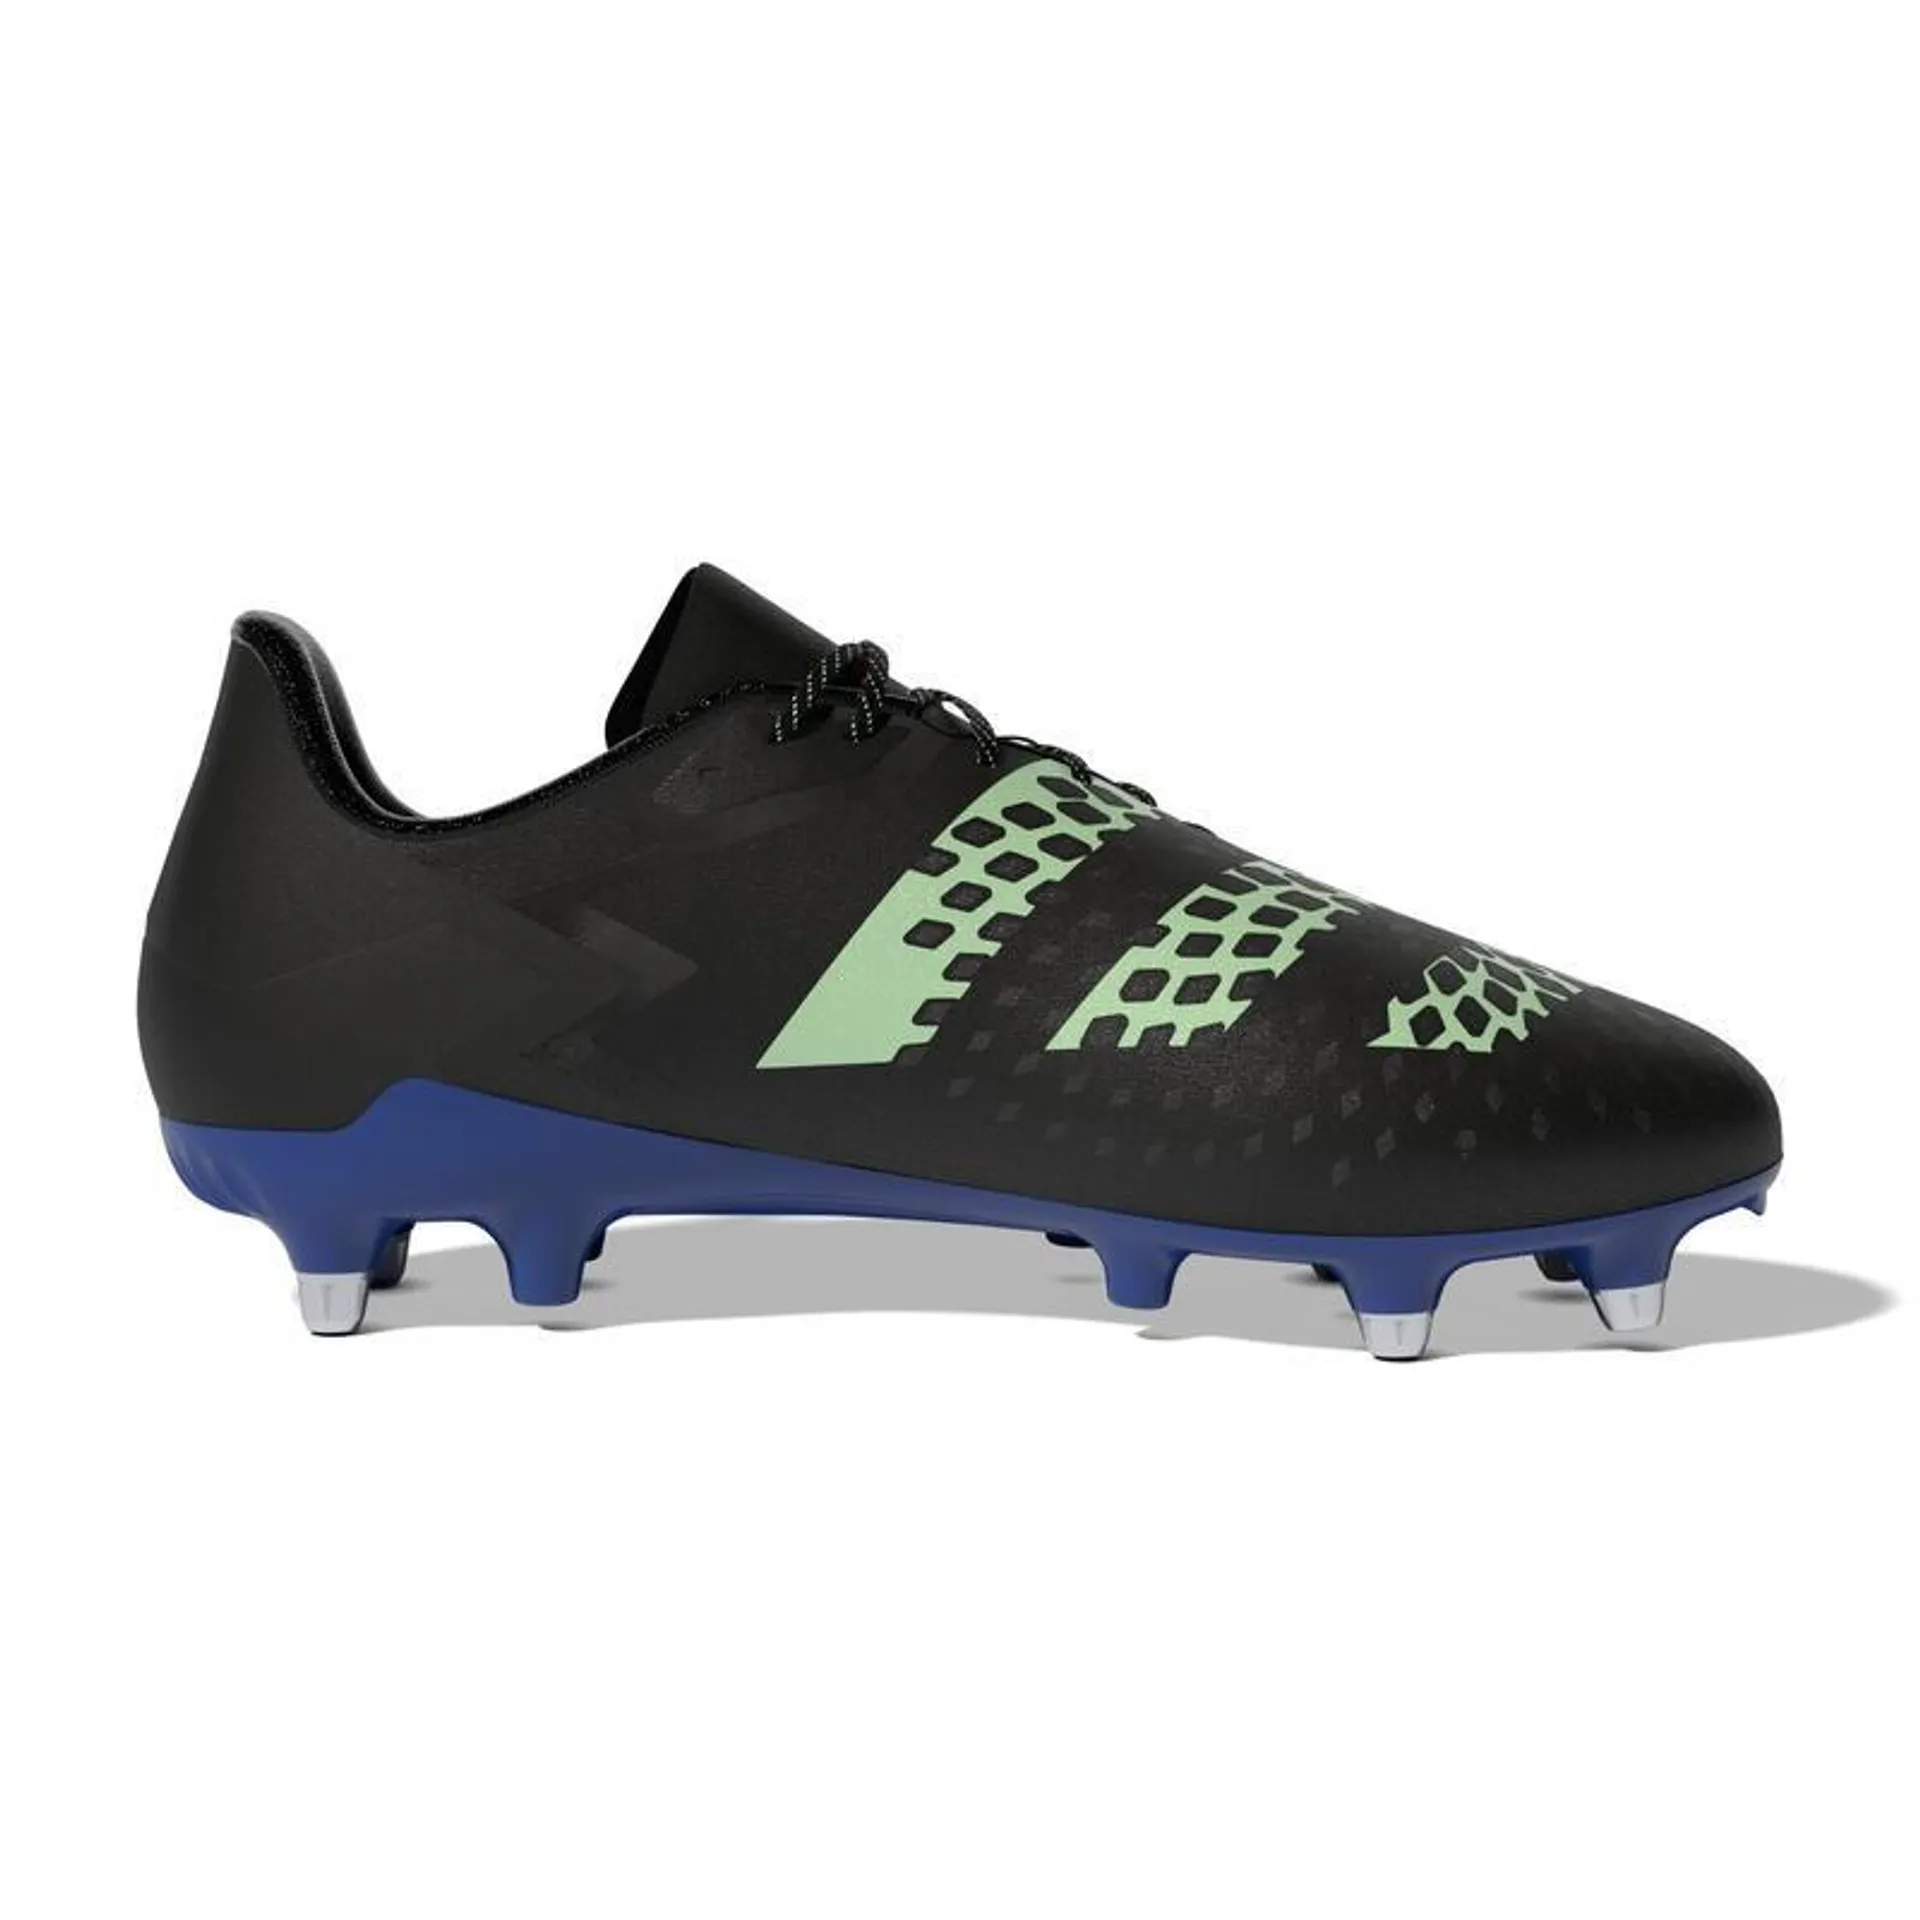 Men's/Women's Soft Pitch Screw-In Rugby Boots Malice SG - Black